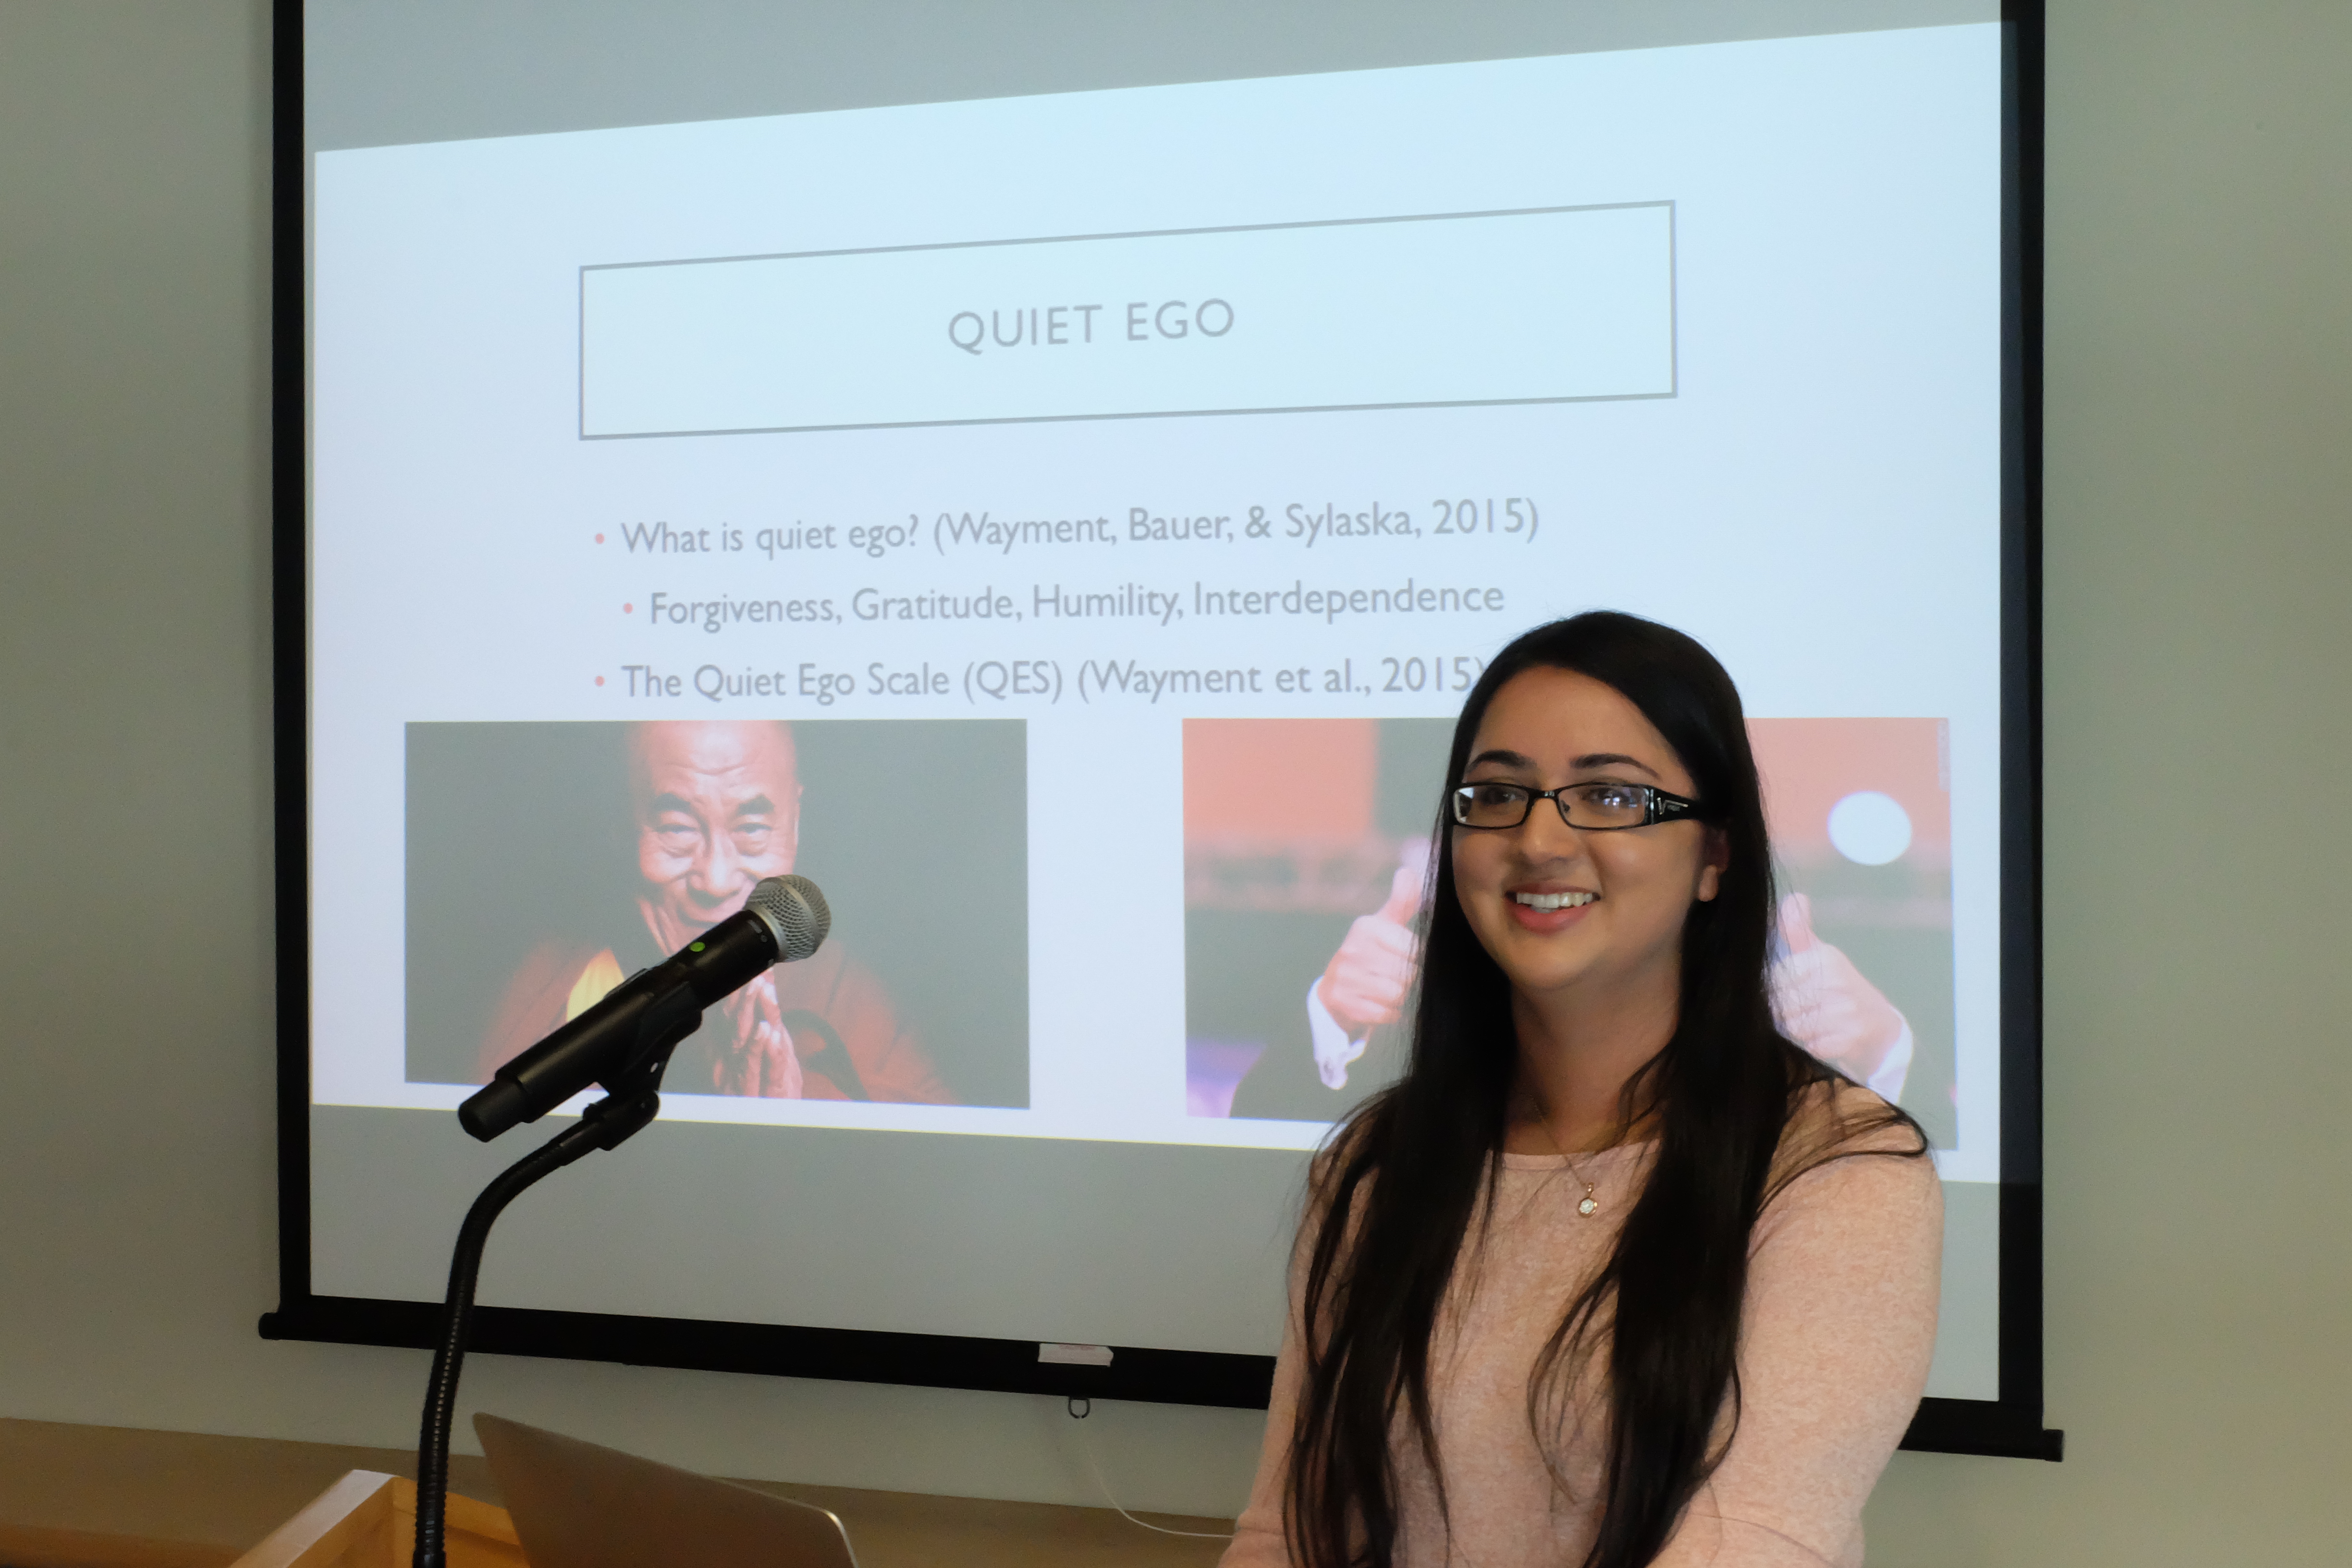 Kiran Ghag: "Relationships between processing style, wisdom, quiet ego, and other things"